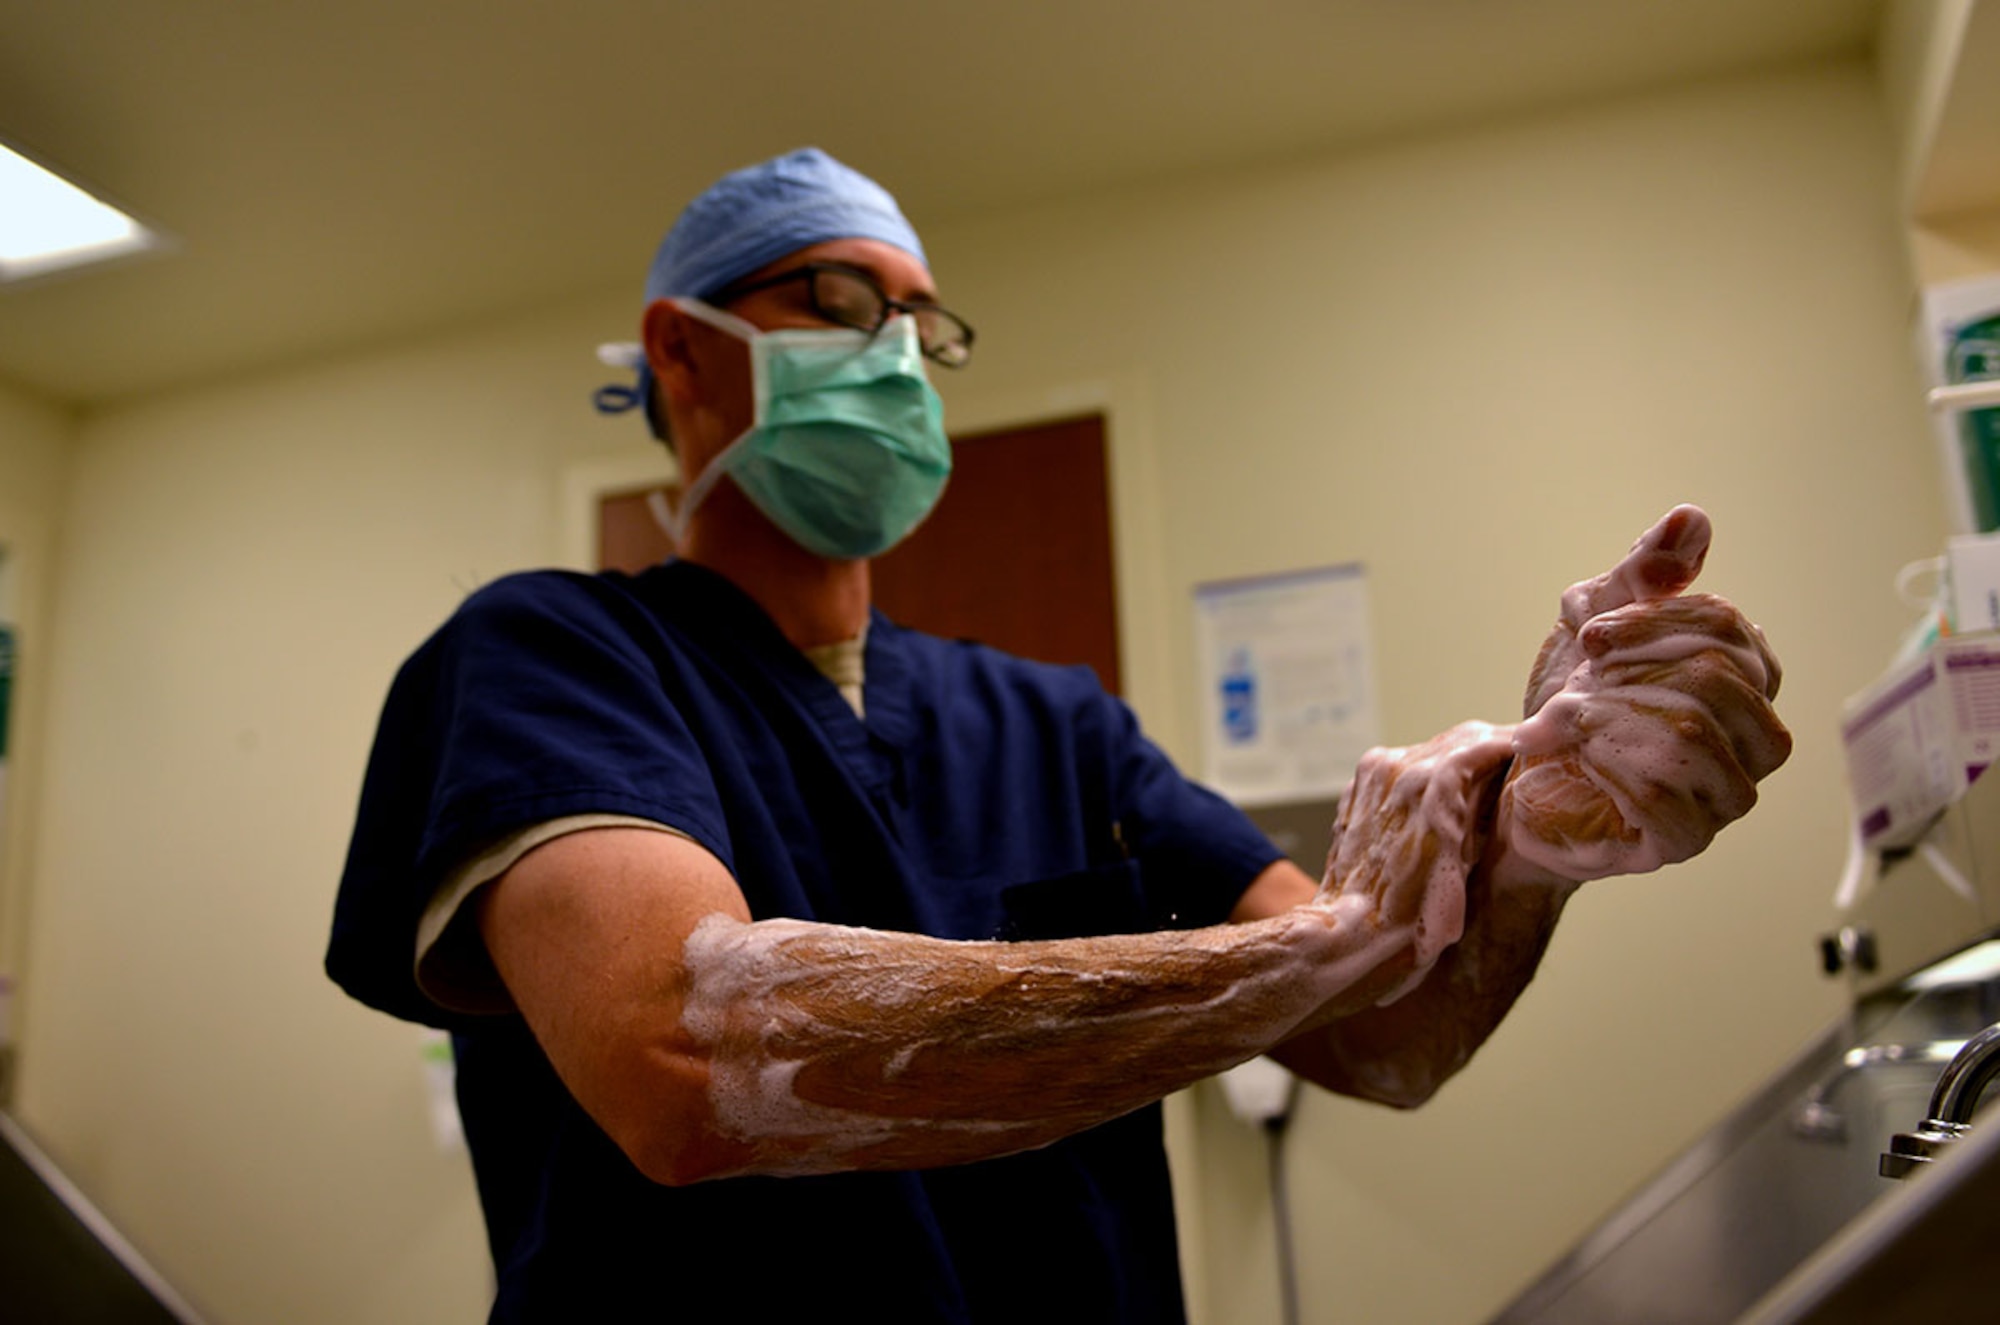 Air Force Maj. Justin Clark, a 673d Medical Group general surgeon, scrubs in for surgery July 27 outside an operating room in the Joint Base Elmendorf-Richardson hospital. The operating rooms are clean areas and everyone must wear scrubs, foot covers, hair covers, and masks while in the room to ensure the area remains sterile. 
 (U.S. Air Force photo/Airman 1st Class Kyle Johnson)
